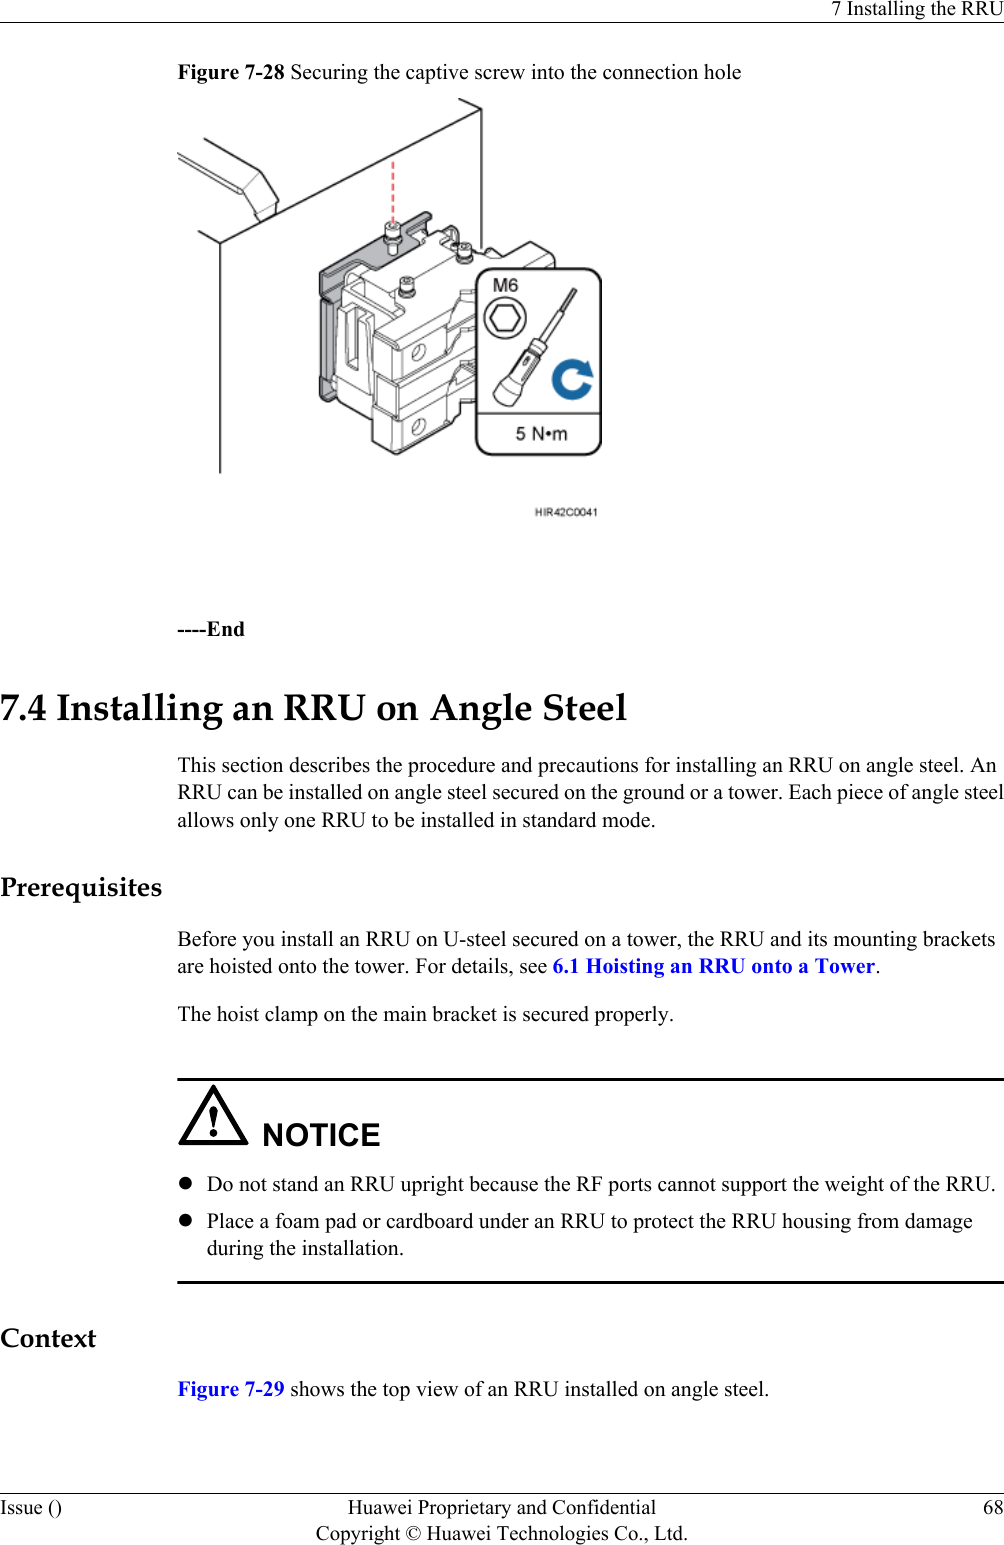 Figure 7-28 Securing the captive screw into the connection hole ----End7.4 Installing an RRU on Angle SteelThis section describes the procedure and precautions for installing an RRU on angle steel. AnRRU can be installed on angle steel secured on the ground or a tower. Each piece of angle steelallows only one RRU to be installed in standard mode.PrerequisitesBefore you install an RRU on U-steel secured on a tower, the RRU and its mounting bracketsare hoisted onto the tower. For details, see 6.1 Hoisting an RRU onto a Tower.The hoist clamp on the main bracket is secured properly.NOTICElDo not stand an RRU upright because the RF ports cannot support the weight of the RRU.lPlace a foam pad or cardboard under an RRU to protect the RRU housing from damageduring the installation.ContextFigure 7-29 shows the top view of an RRU installed on angle steel.7 Installing the RRUIssue () Huawei Proprietary and ConfidentialCopyright © Huawei Technologies Co., Ltd.68